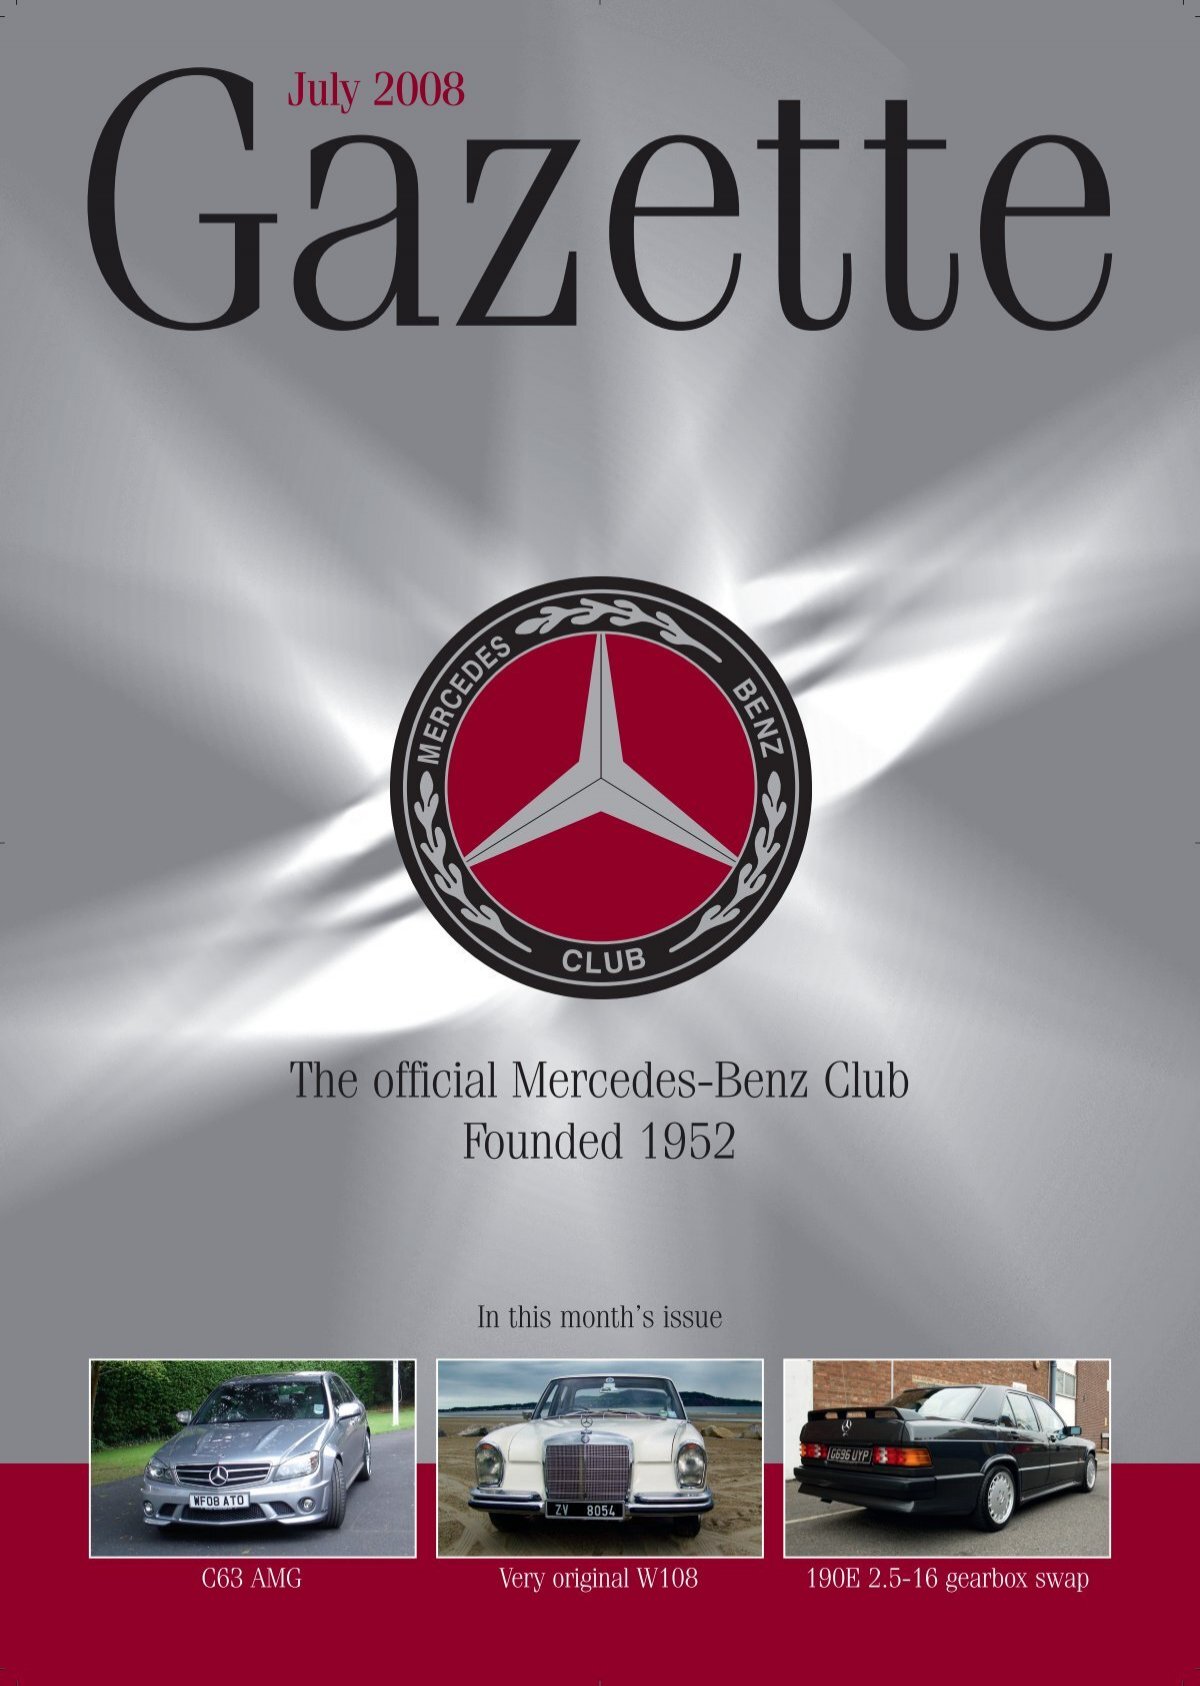 The official Mercedes-Benz Club Founded 1952 - Team Stadler